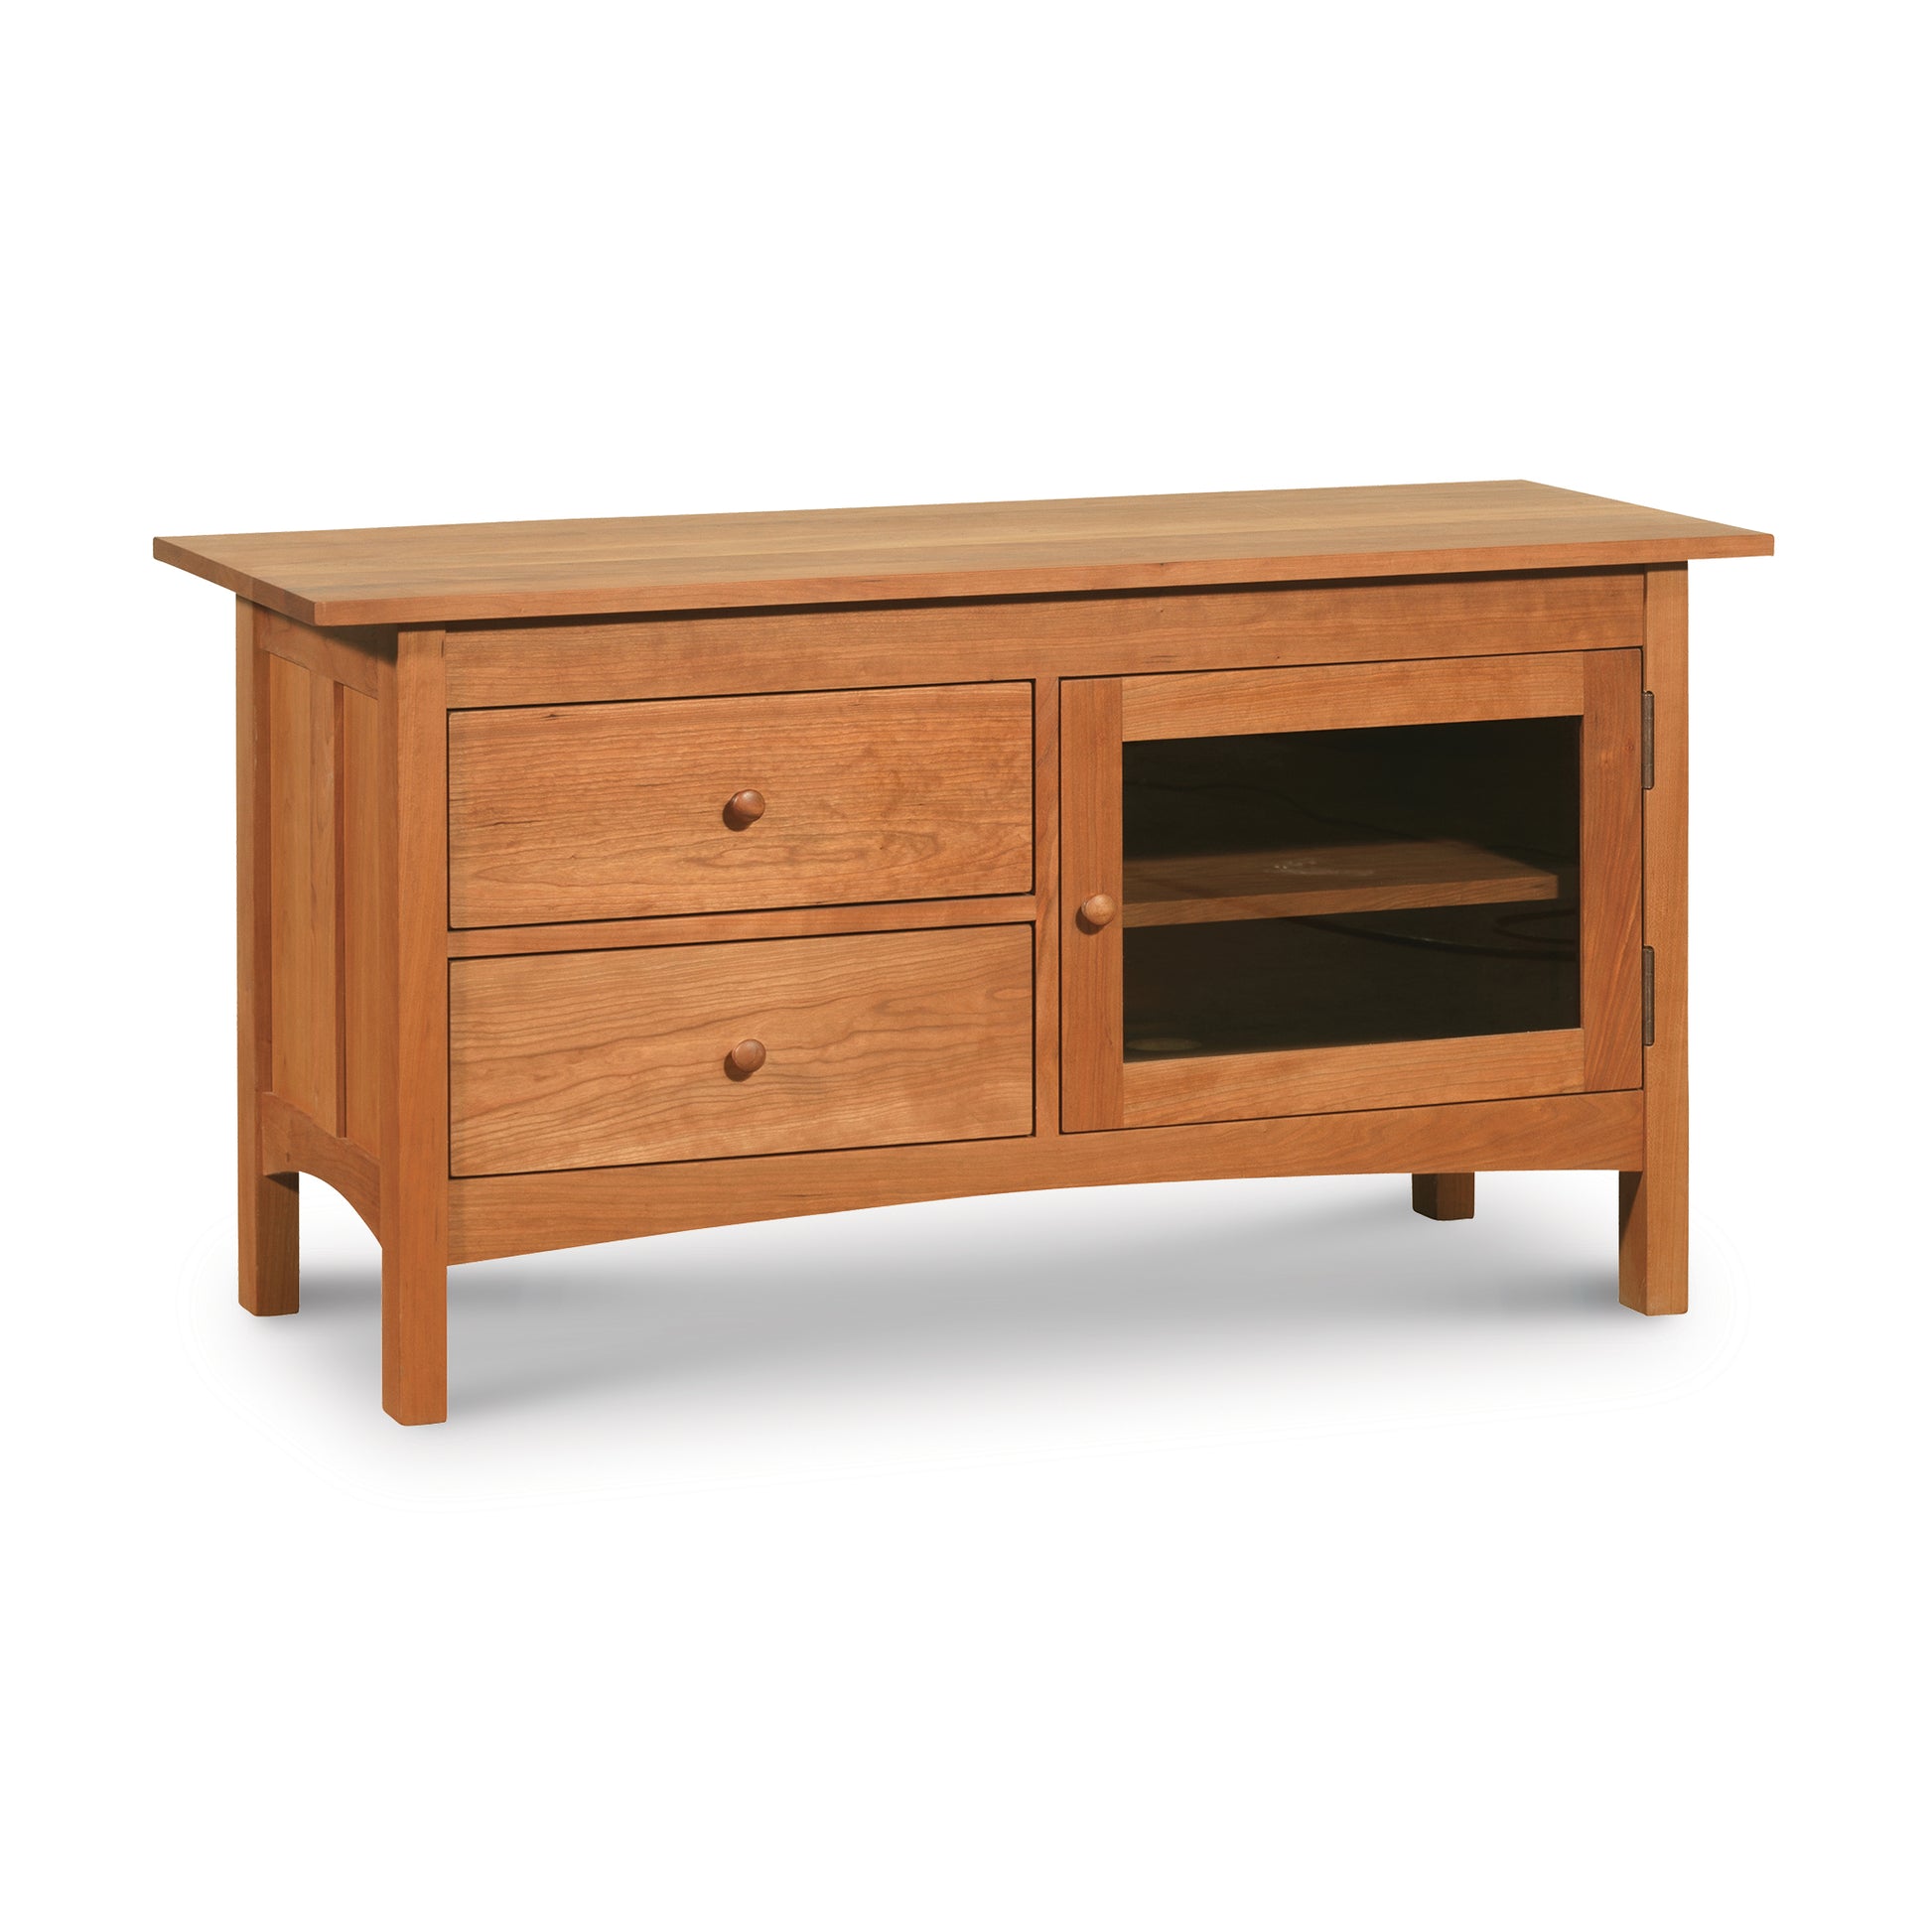 A luxurious Burlington Shaker Two Drawer Media Console with two drawers and a glass door for entertainment by Vermont Furniture Designs.